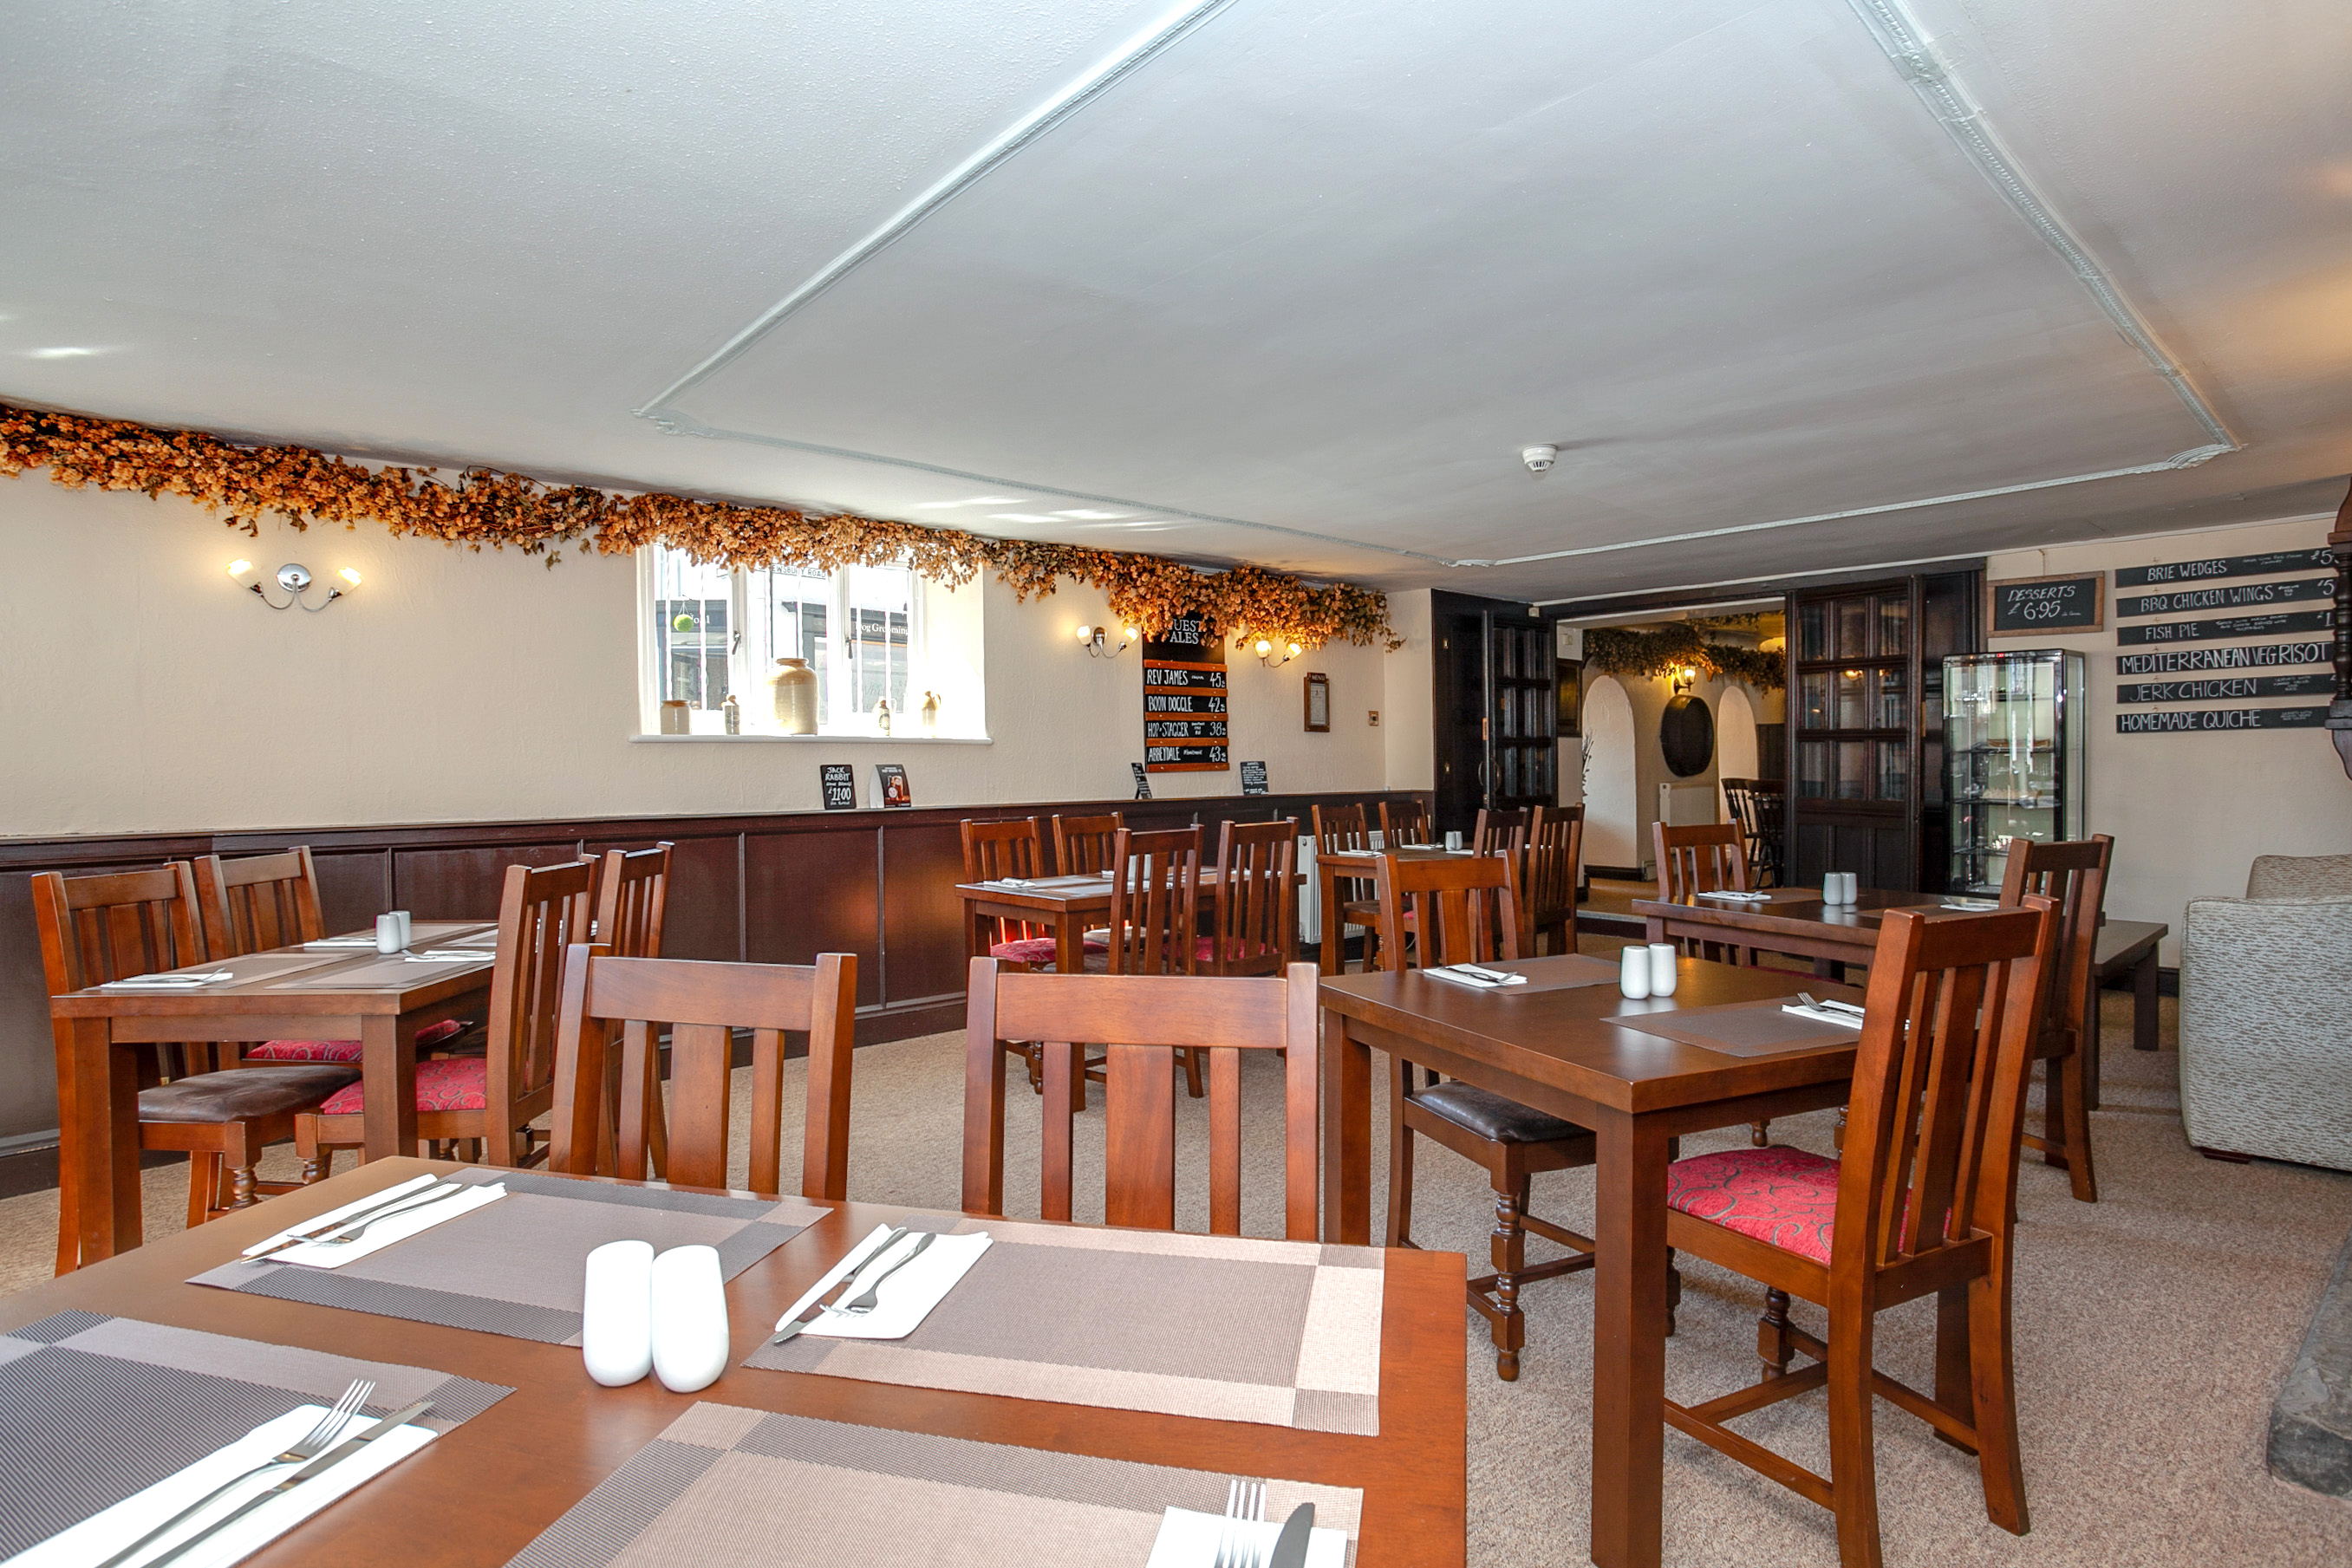 Open plan dining at the coppers malt house restaurant.